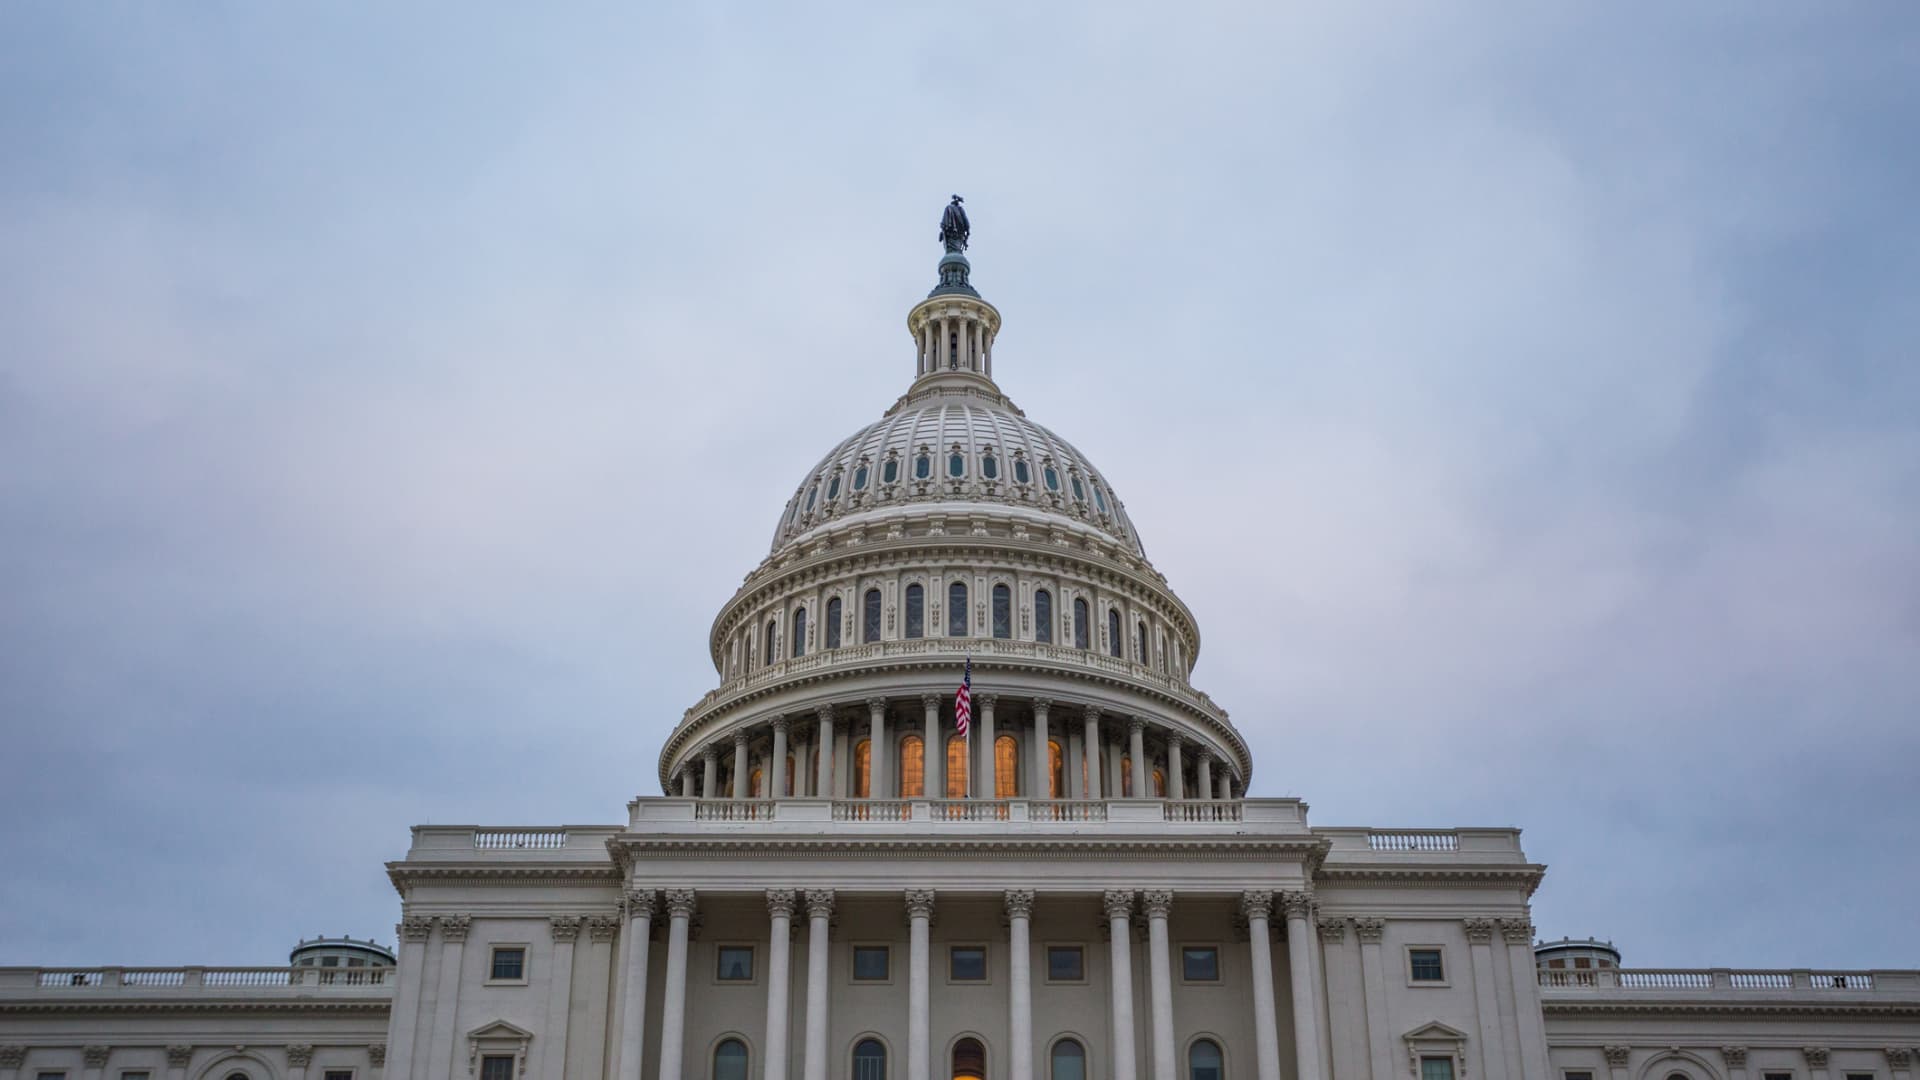 Secure 2.0 clears Congress, will bring changes to retirement system